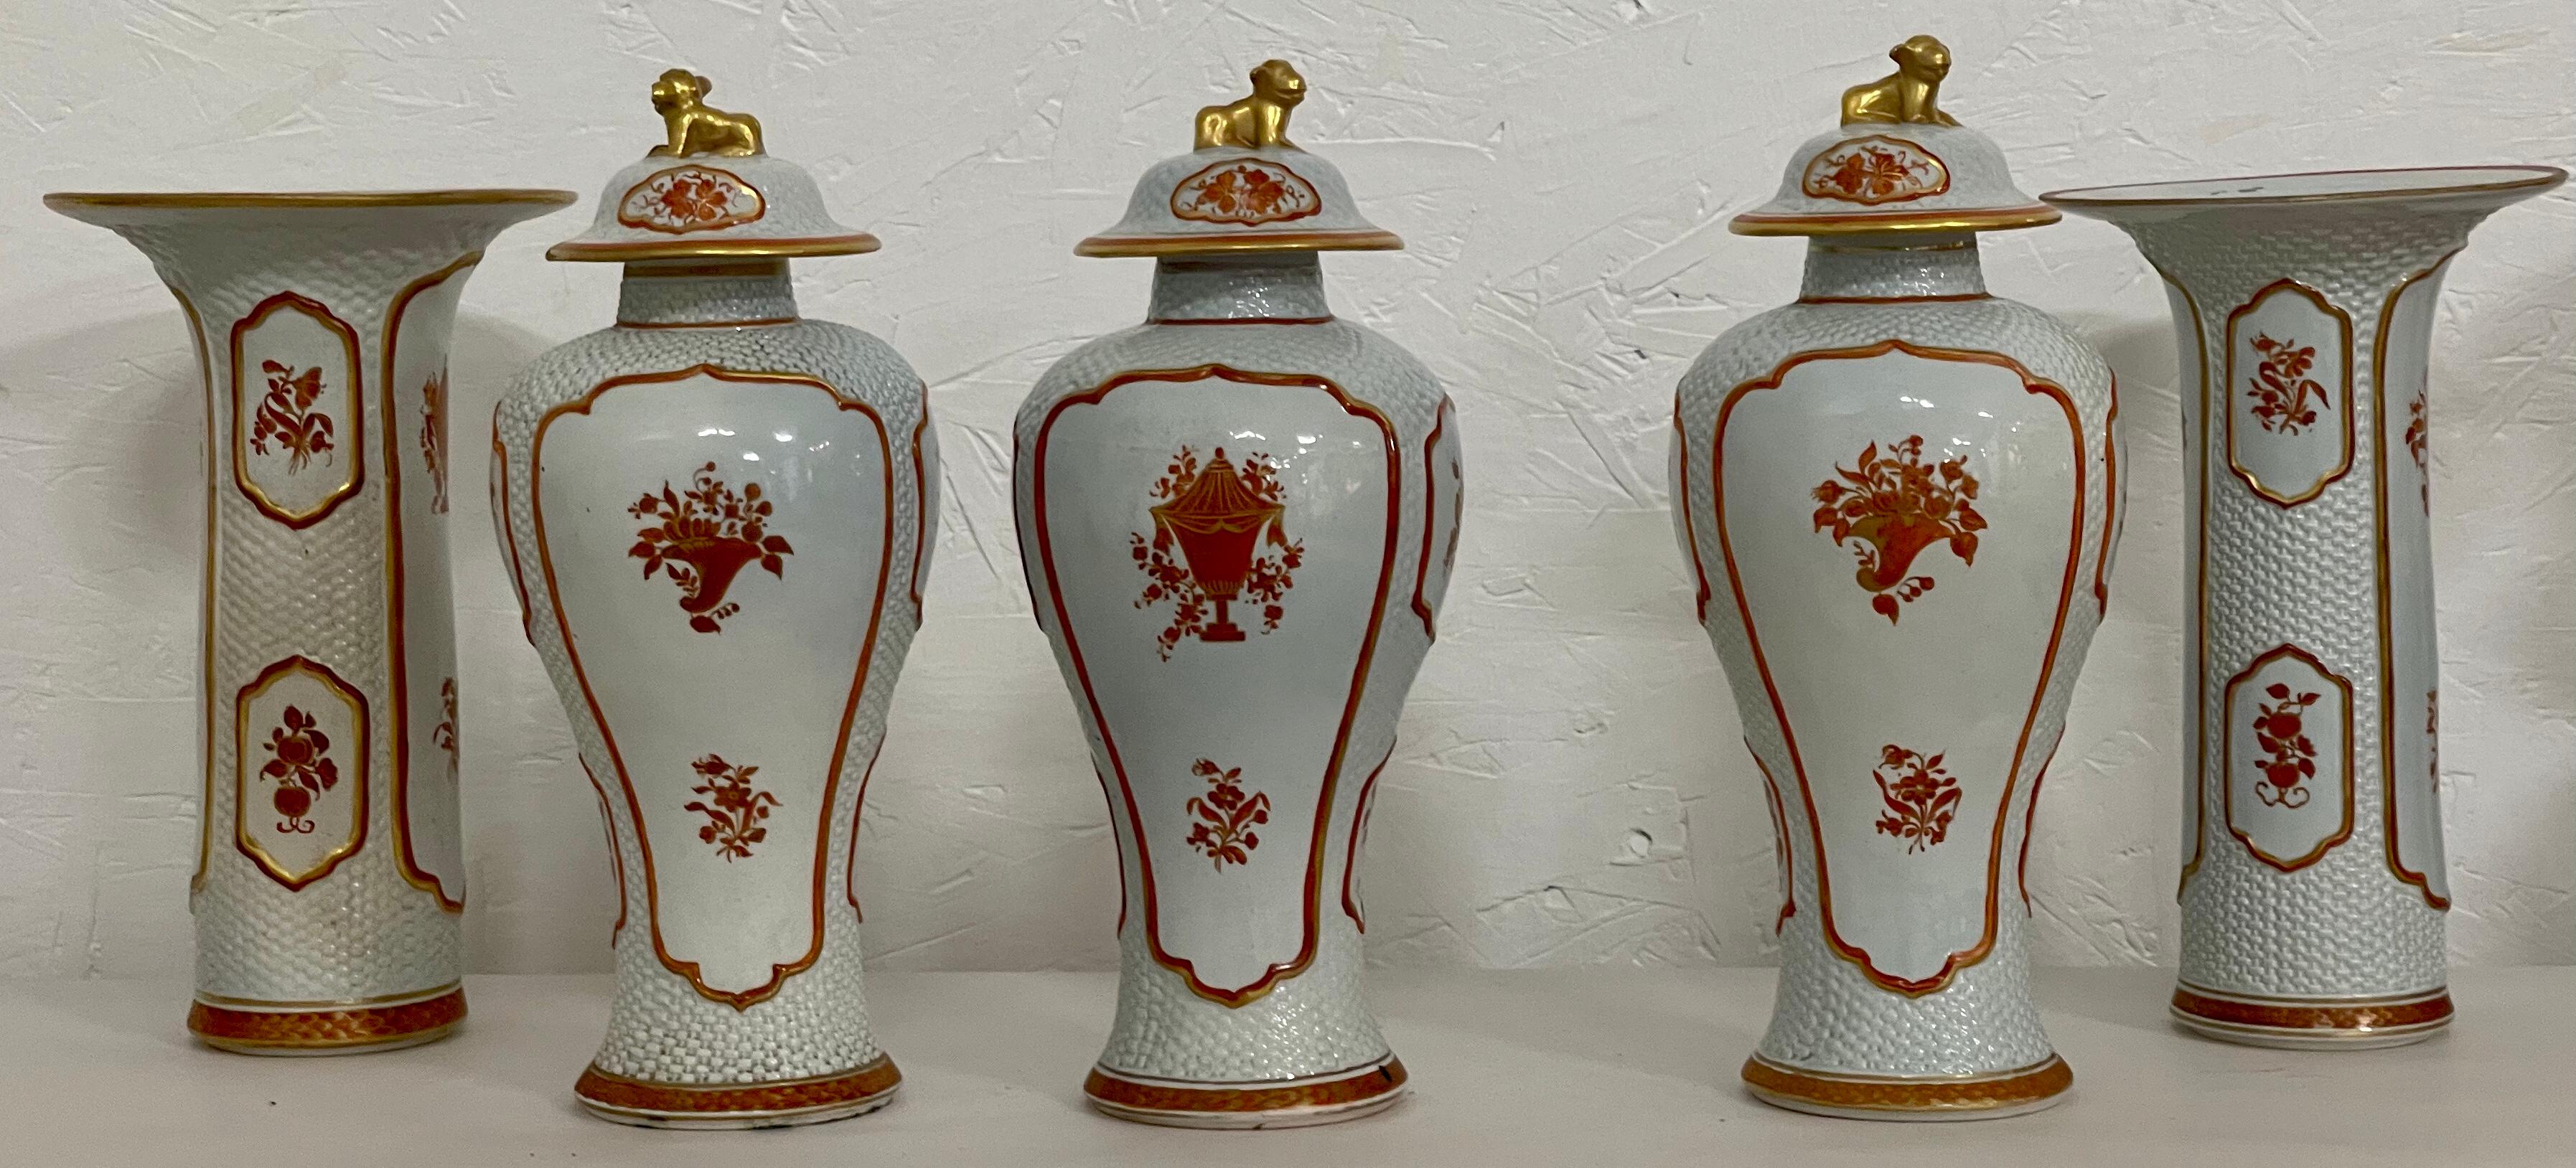 Chinese Export Armorial Garniture Set with Vases and Foo Dog Ginger Jars by Mottahedeh, S/5